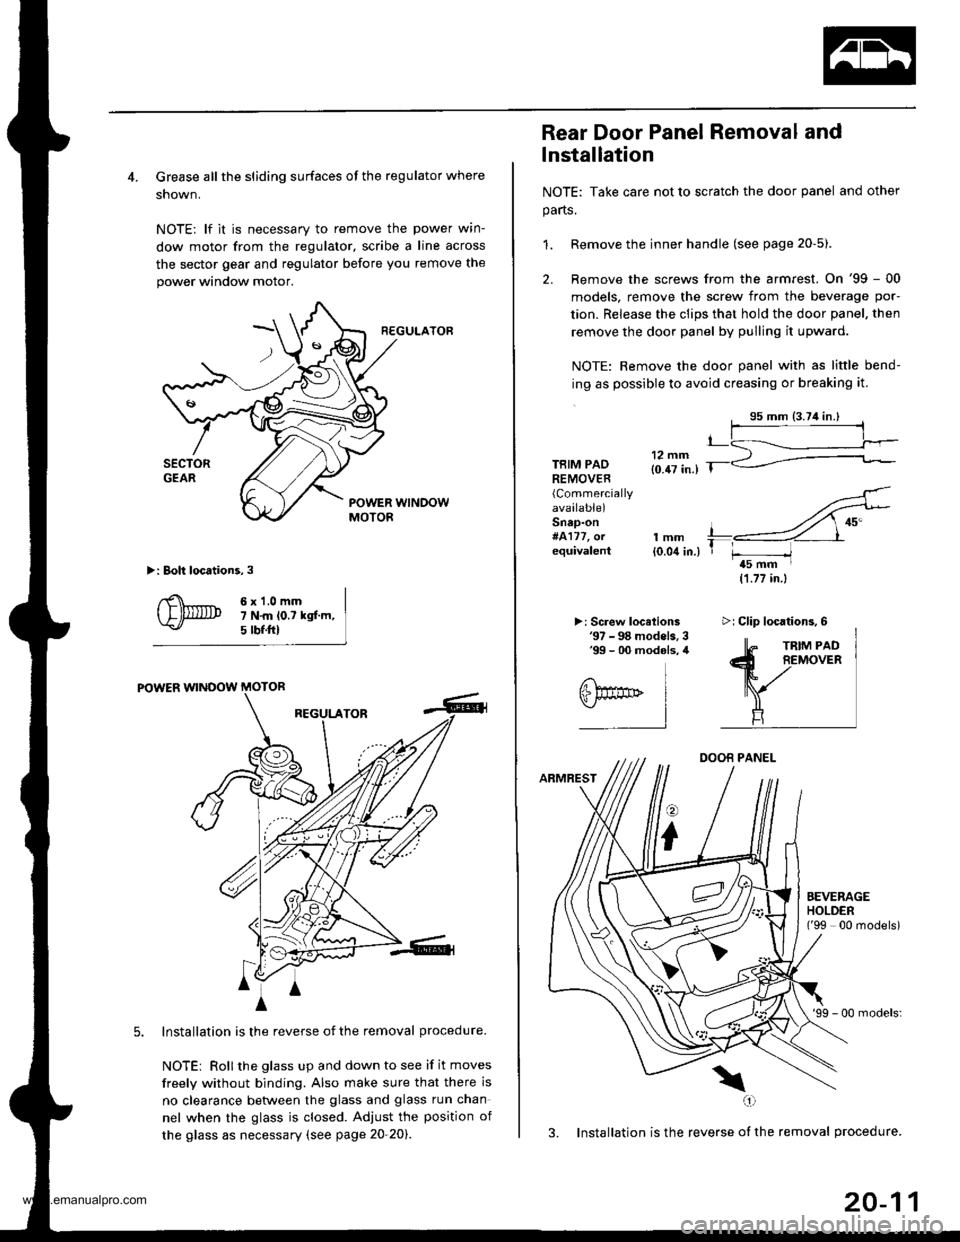 HONDA CR-V 2000 RD1-RD3 / 1.G Workshop Manual 
4. Grease all the sliding surfaces of the regulator where
shown.
NOTE: lf it is necessary to remove the power wrn-
dow motor from the regulator, scribe a line across
the sector gear and regulator bef